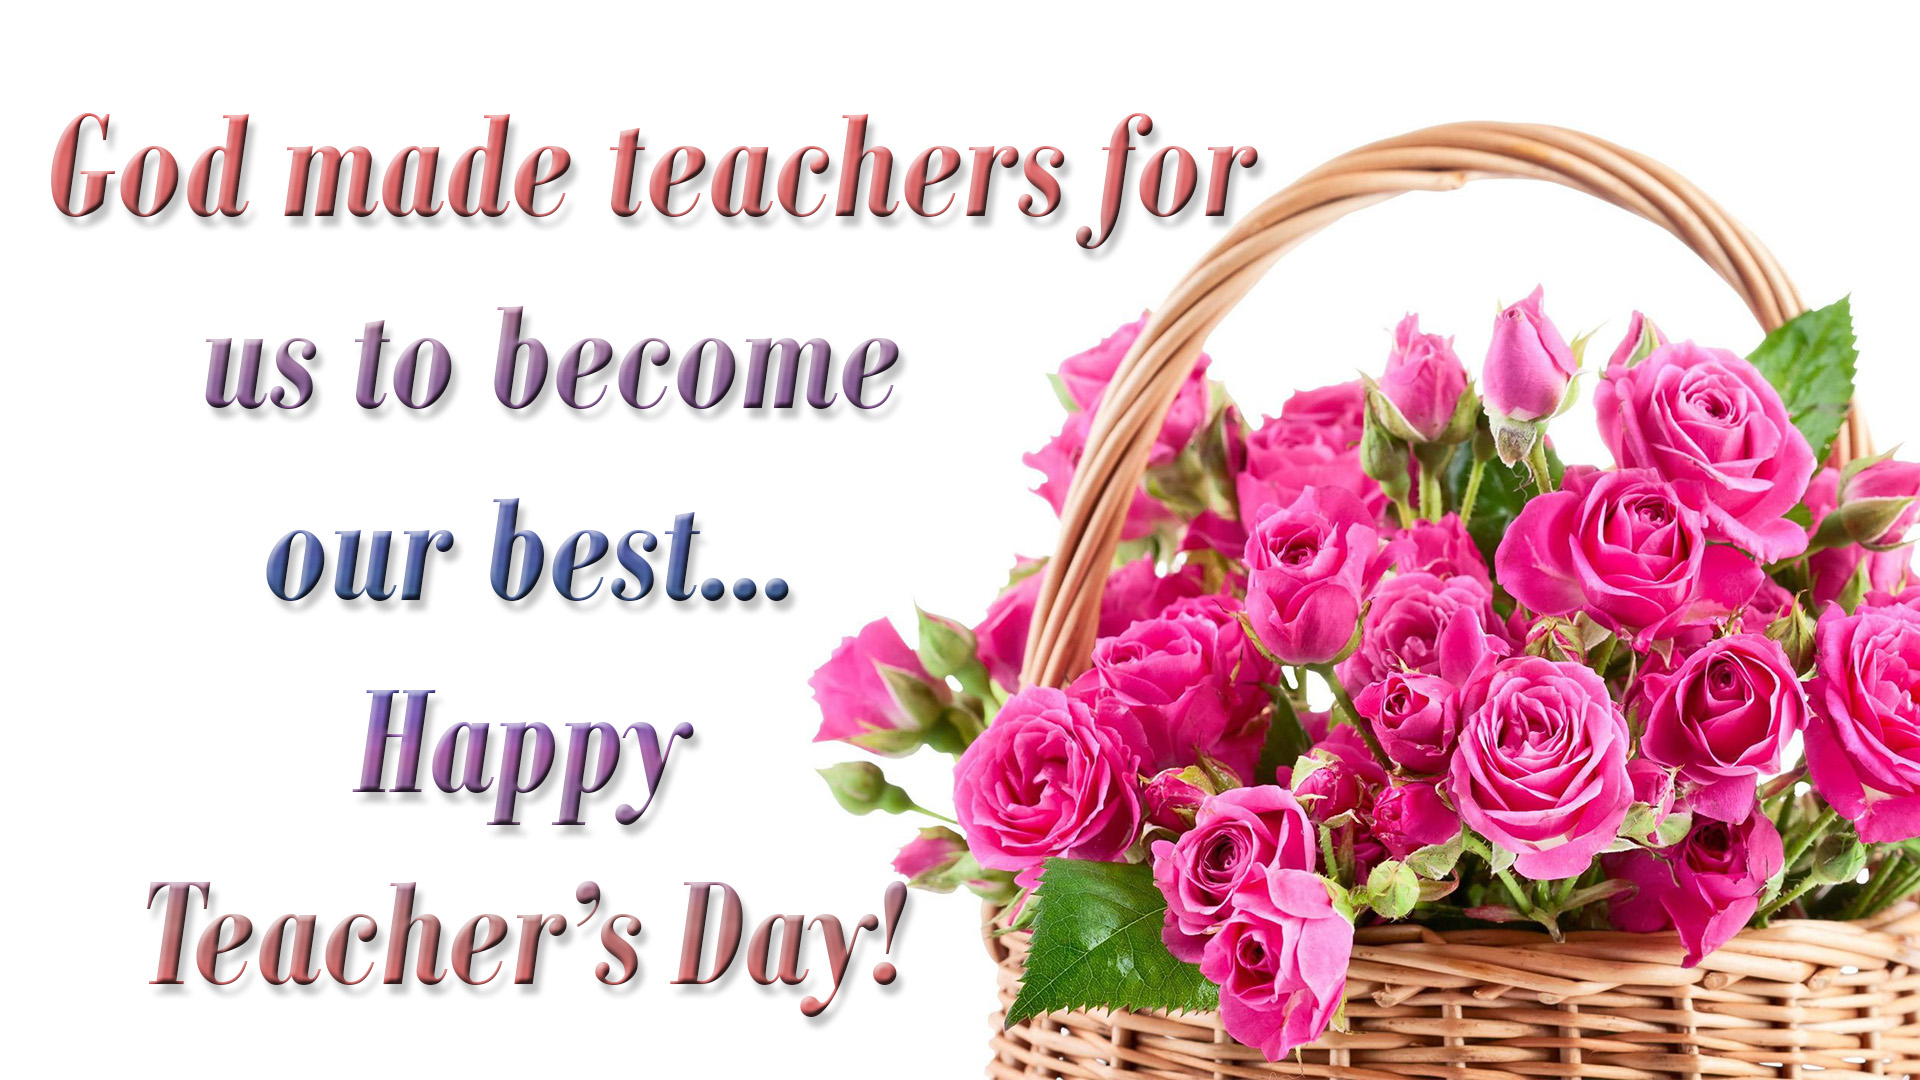 Happy Teachers Day Wishes 2018 Images | Teacher's Day 2018